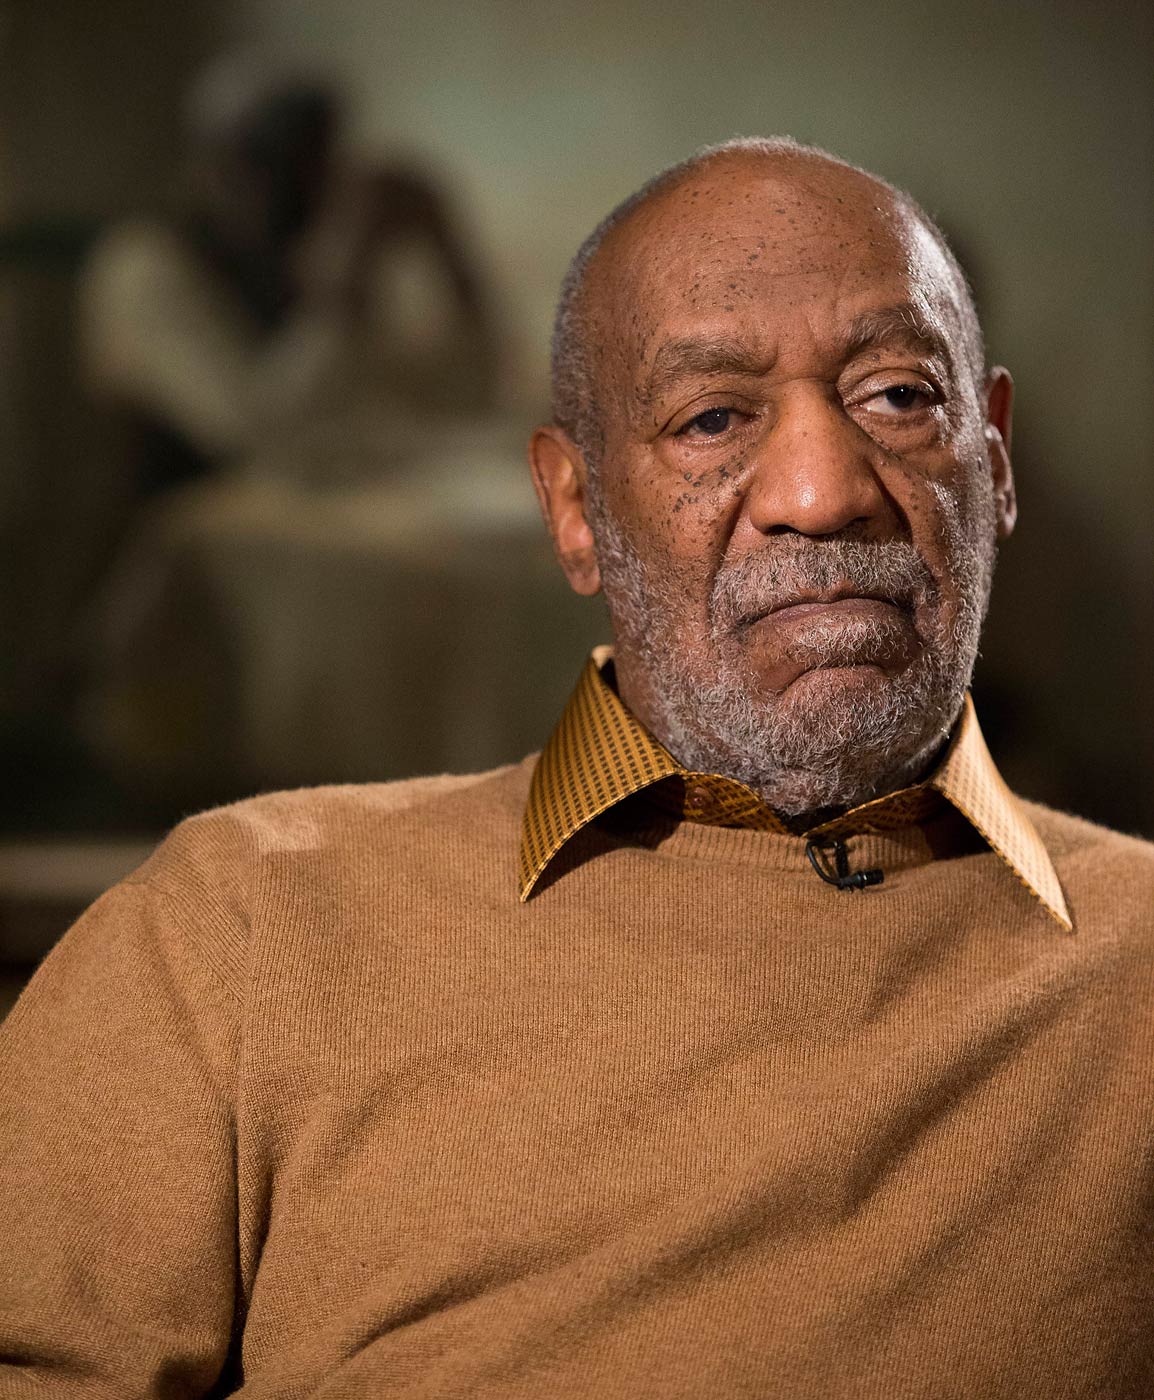 Bill Cosby sits for an interview about the exhibit, Conversations: African and African-American Artworks in Dialogue, at the Smithsonian's National Museum of African Art in Washington on Nov. 6, 2014. (Evan Vucci—AP)